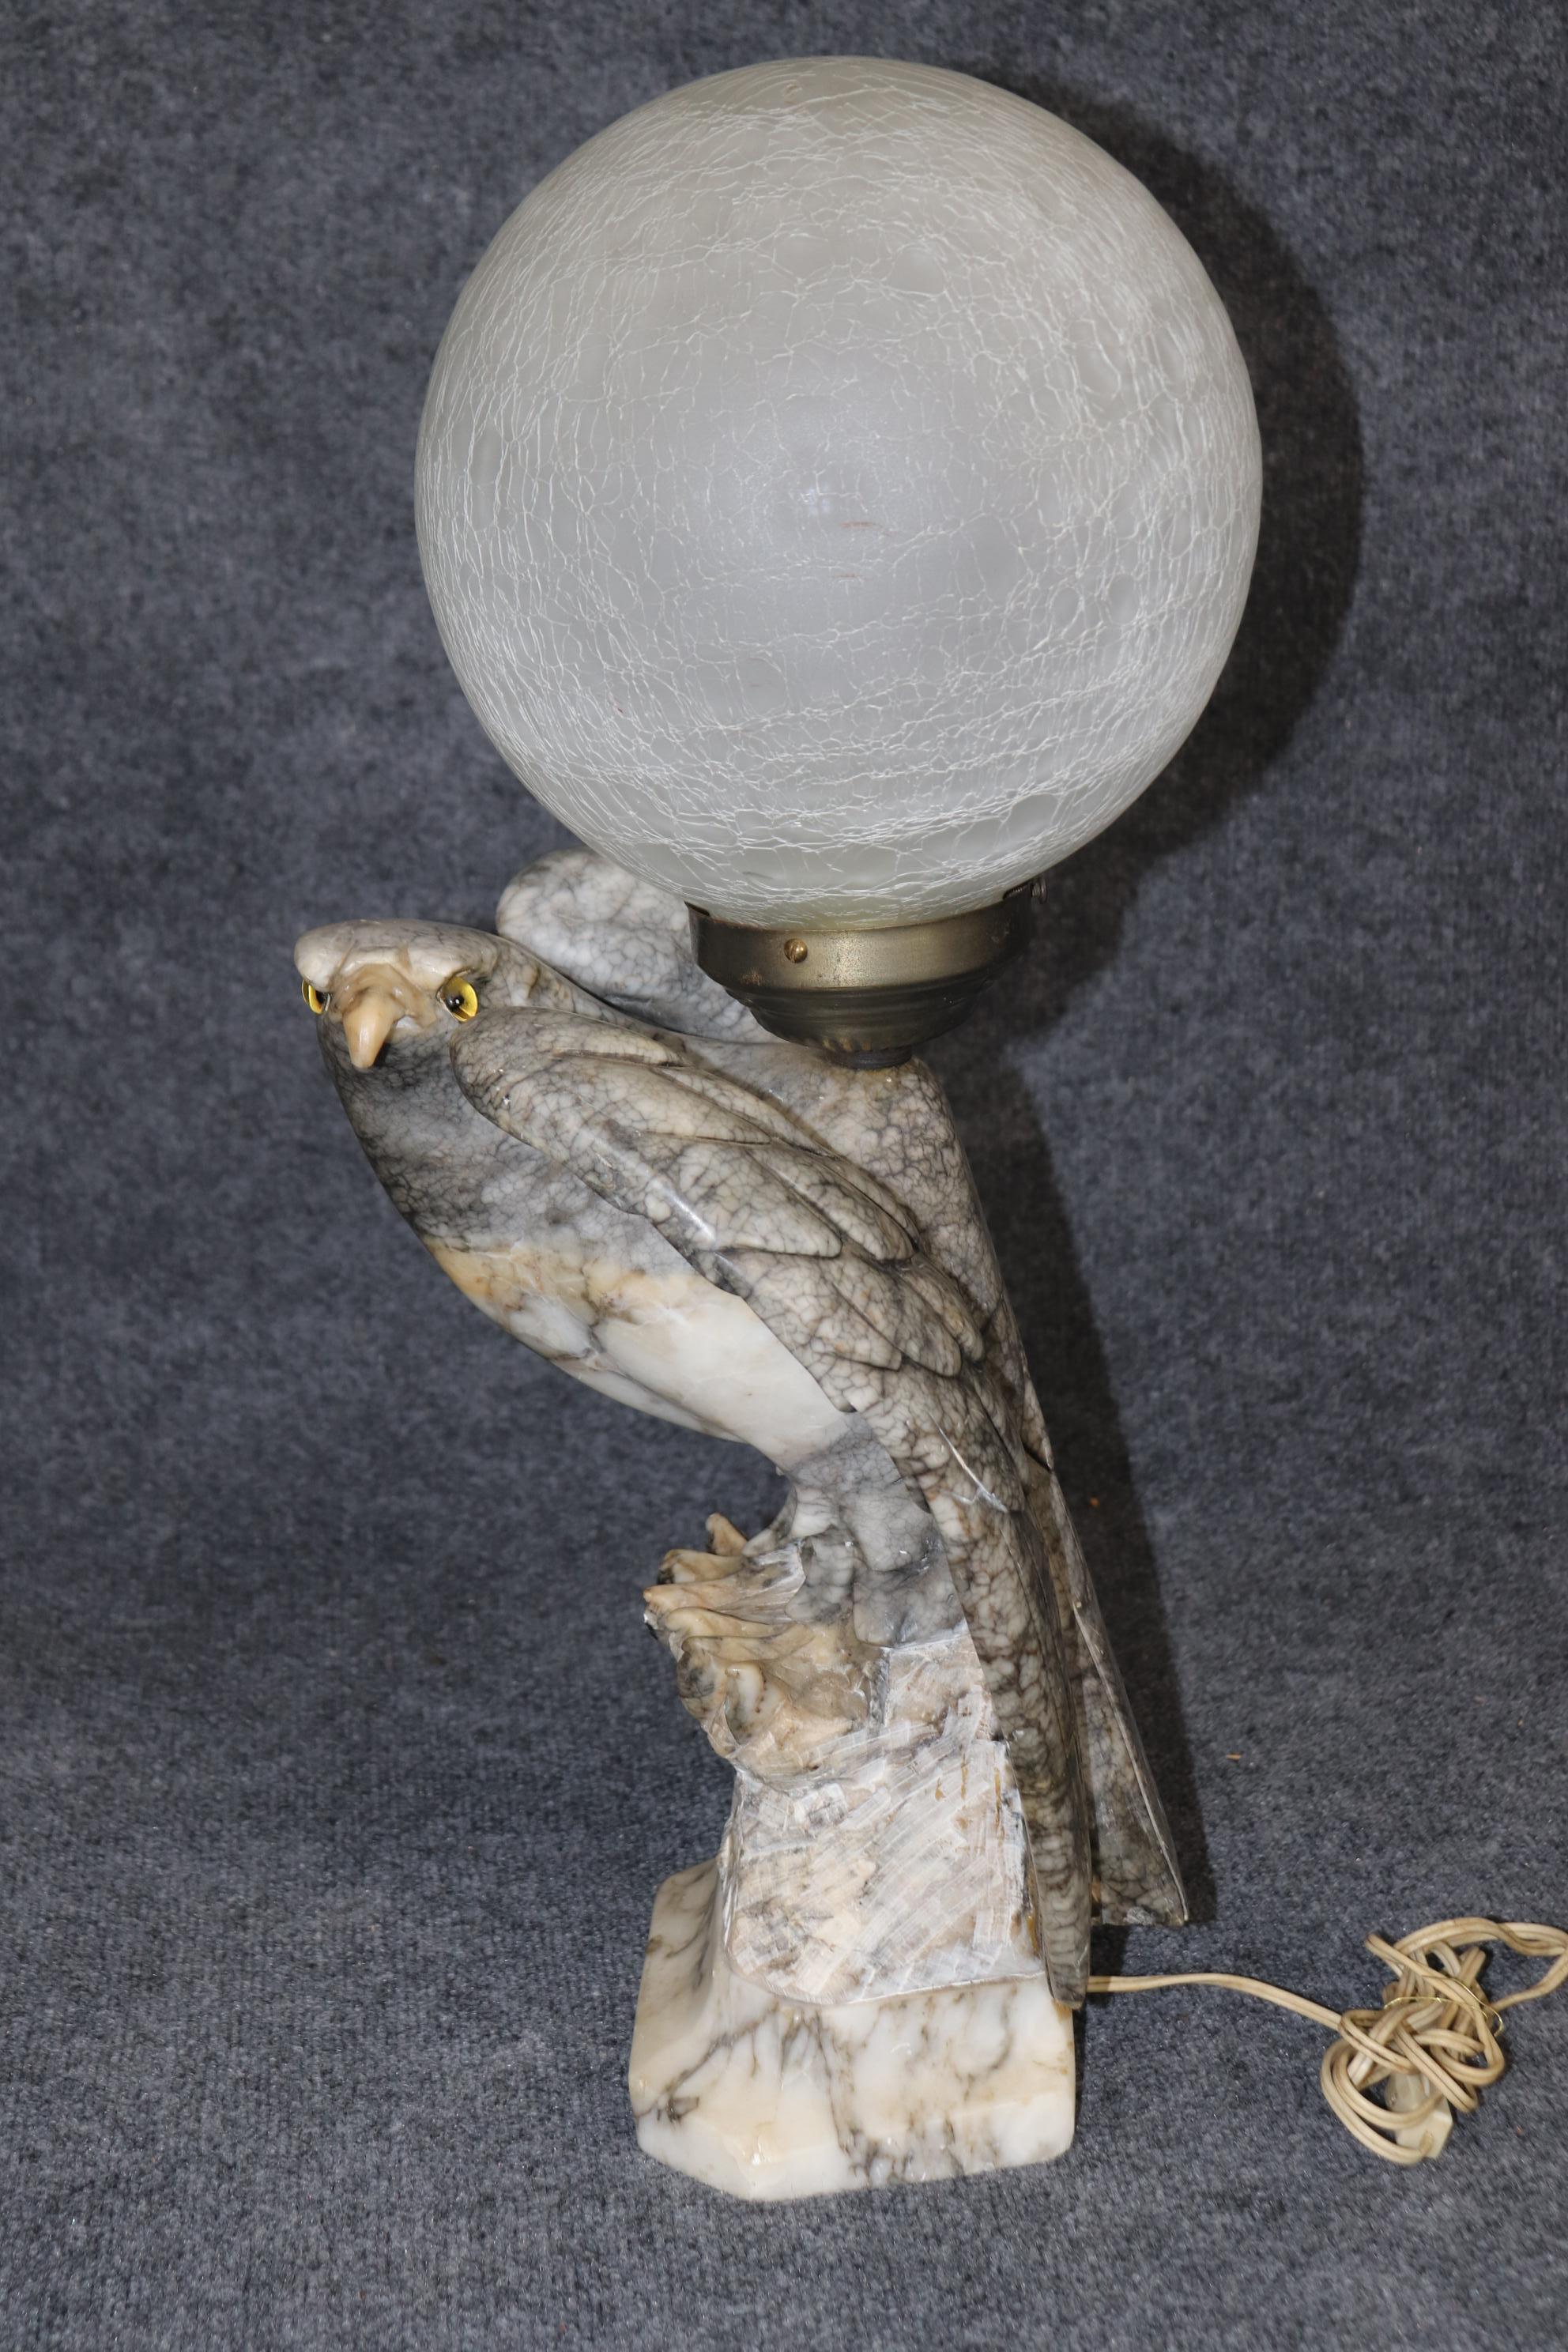 Dimensions- H: 25in W: 13 1/4in D: 10 3/4in 

This vintage Neoclassical style carved alabaster eagle lamp is truly unique and crafted of the highest quality! This is perfect for any living room, bedroom, entryway, kitchen or office and is bound to